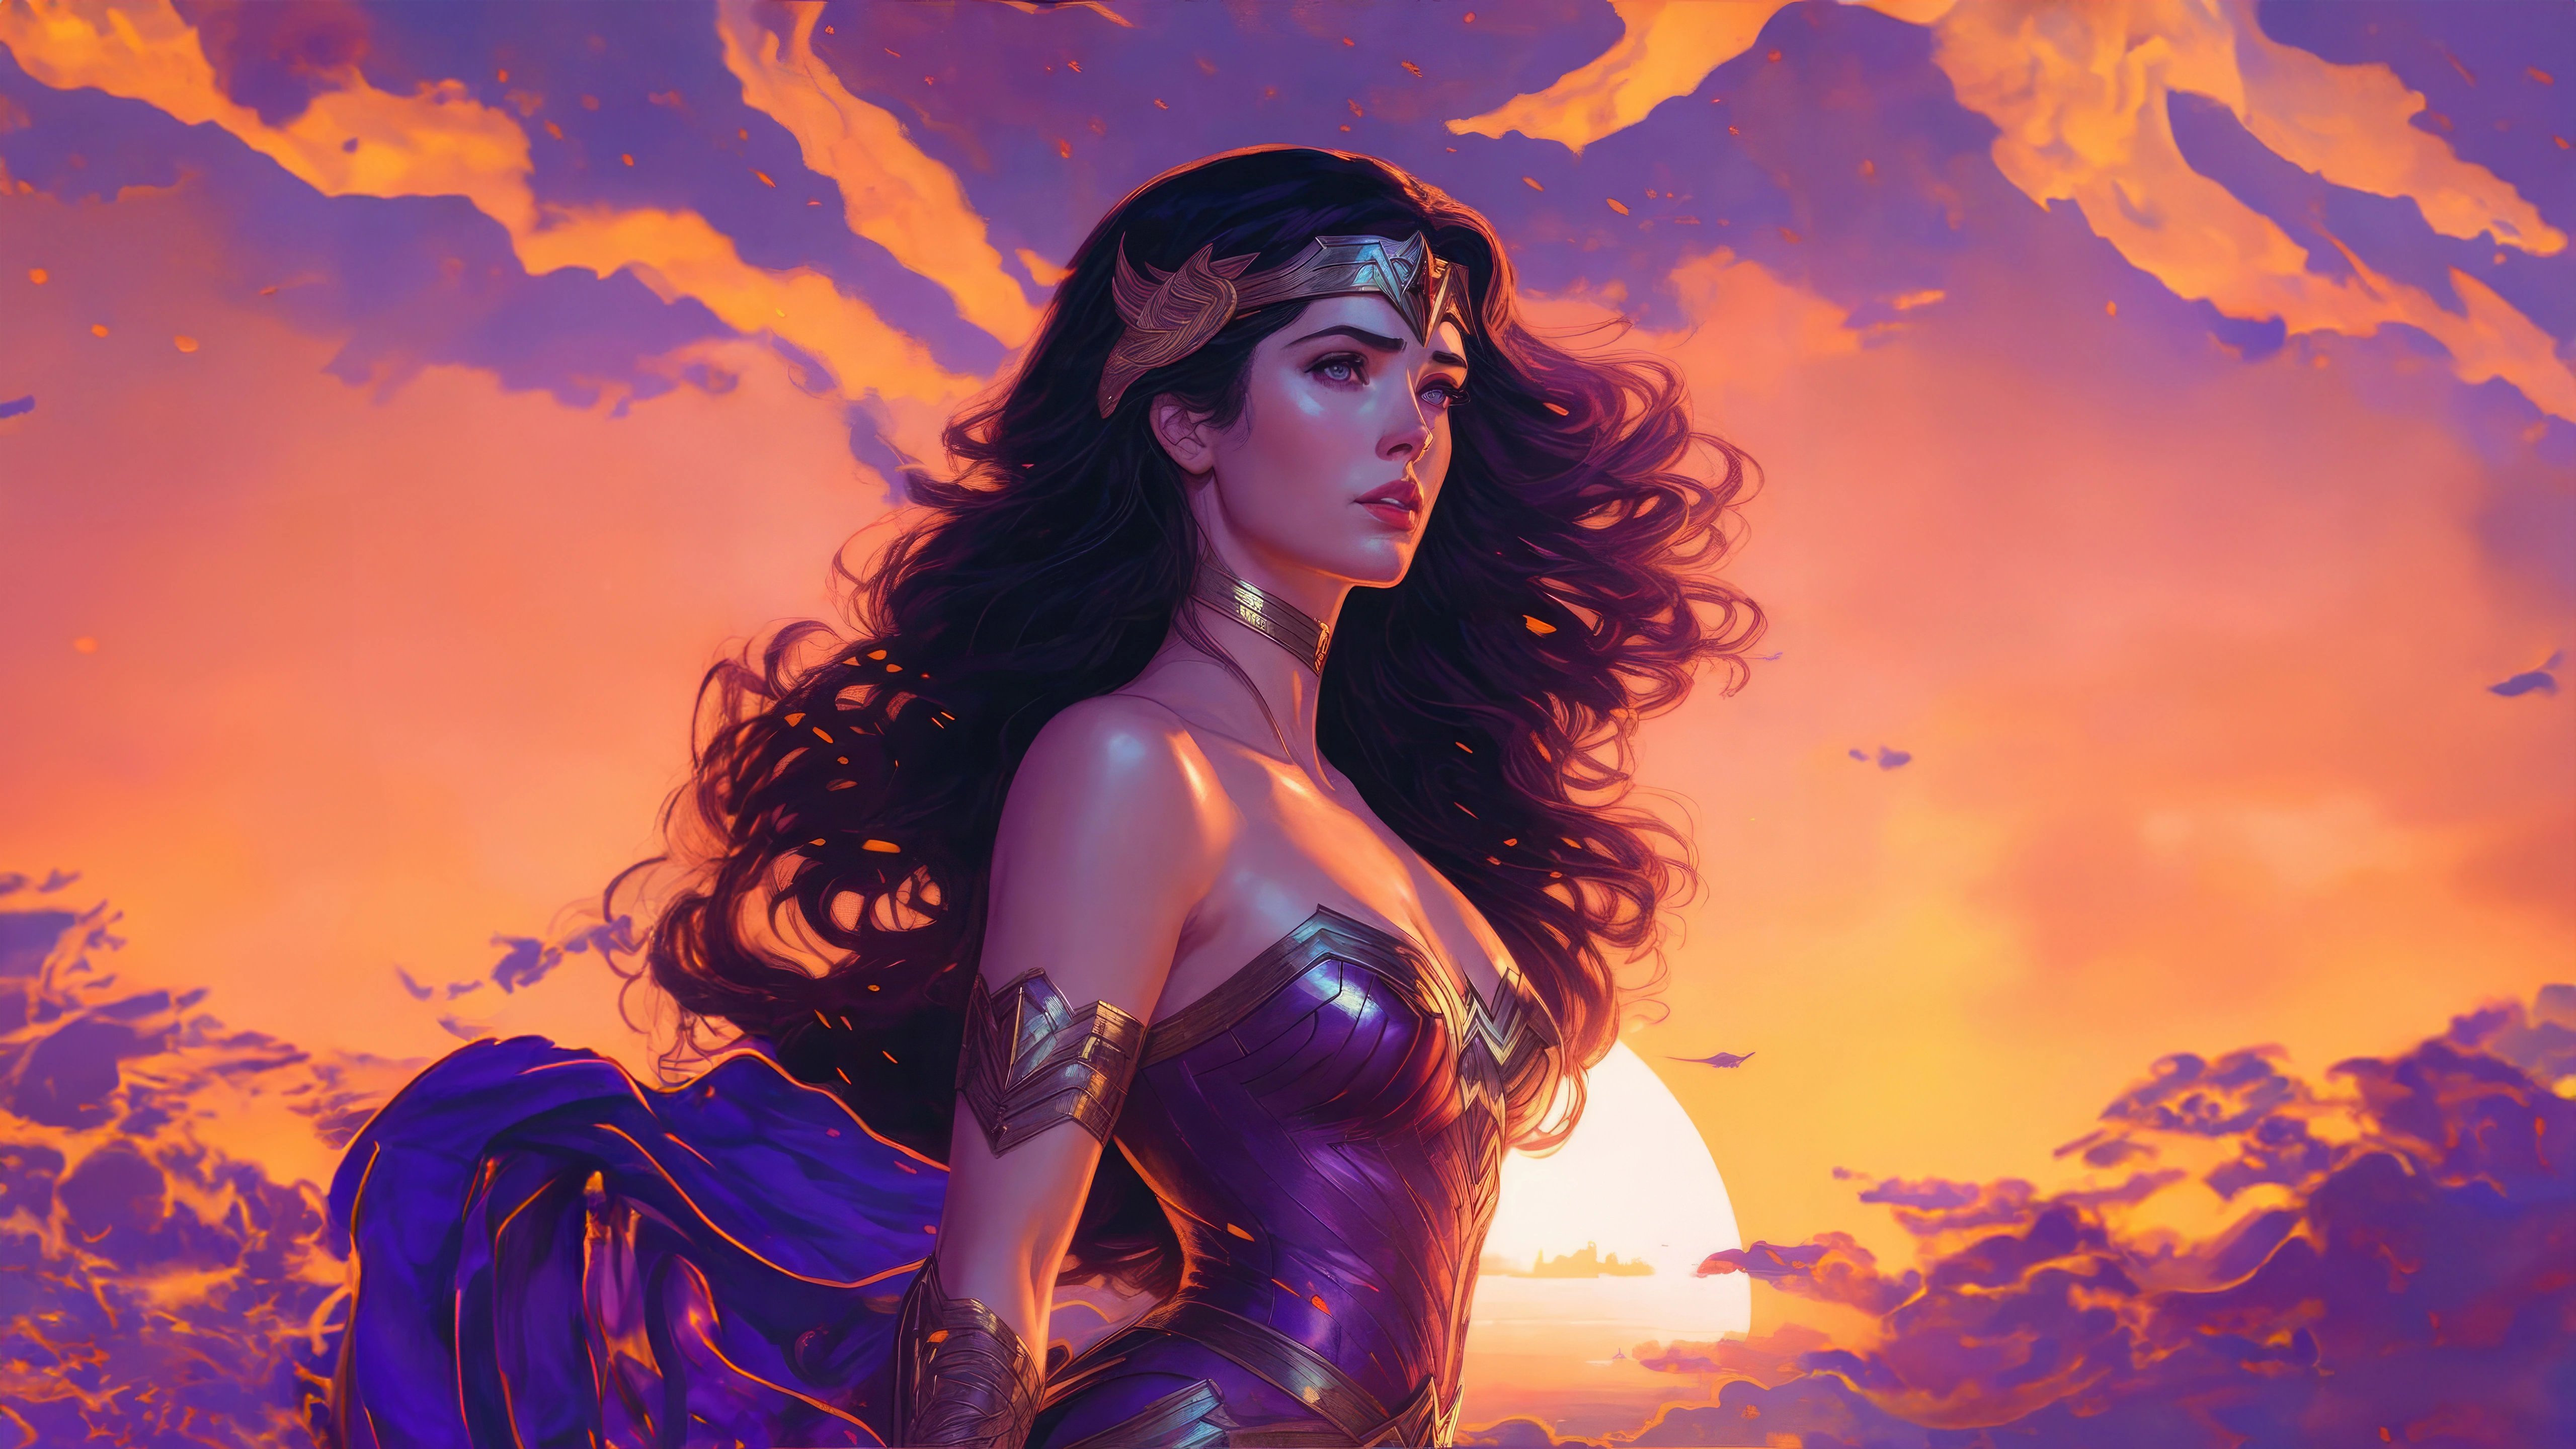 wonder woman in a colorful world of heroism mh.jpg